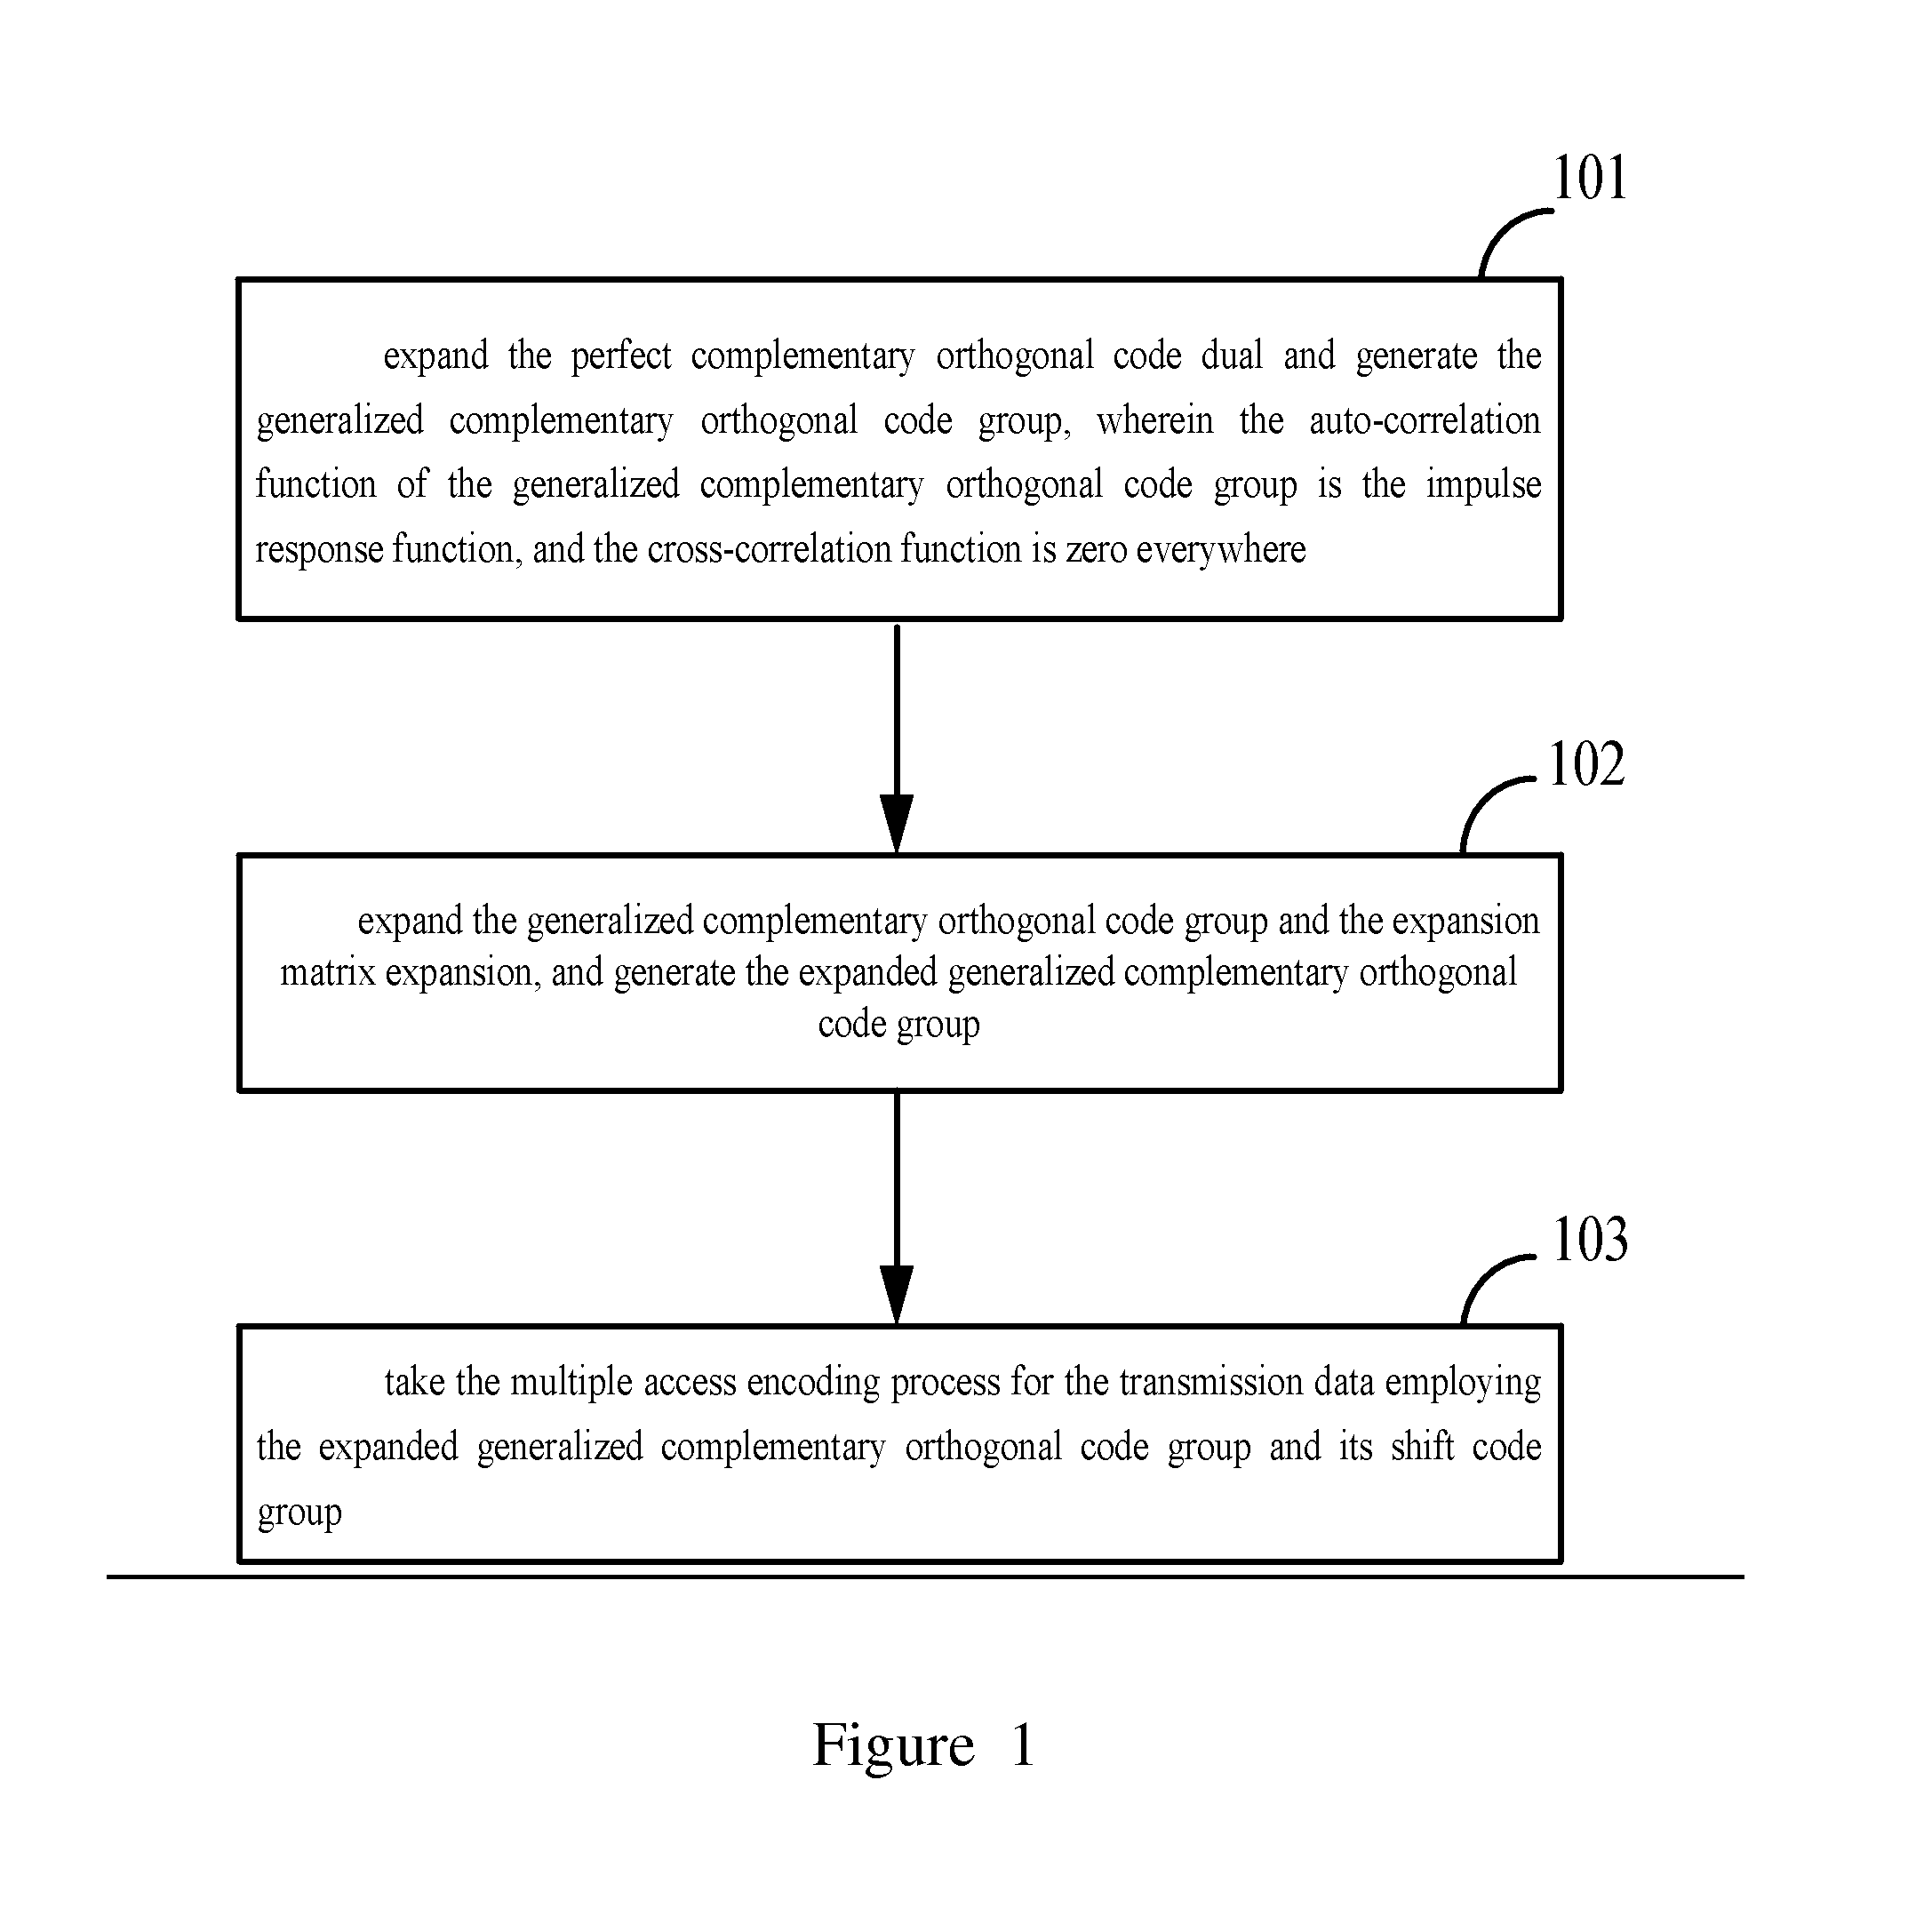 Methods and systems for multiple access encoding, transmission and decoding